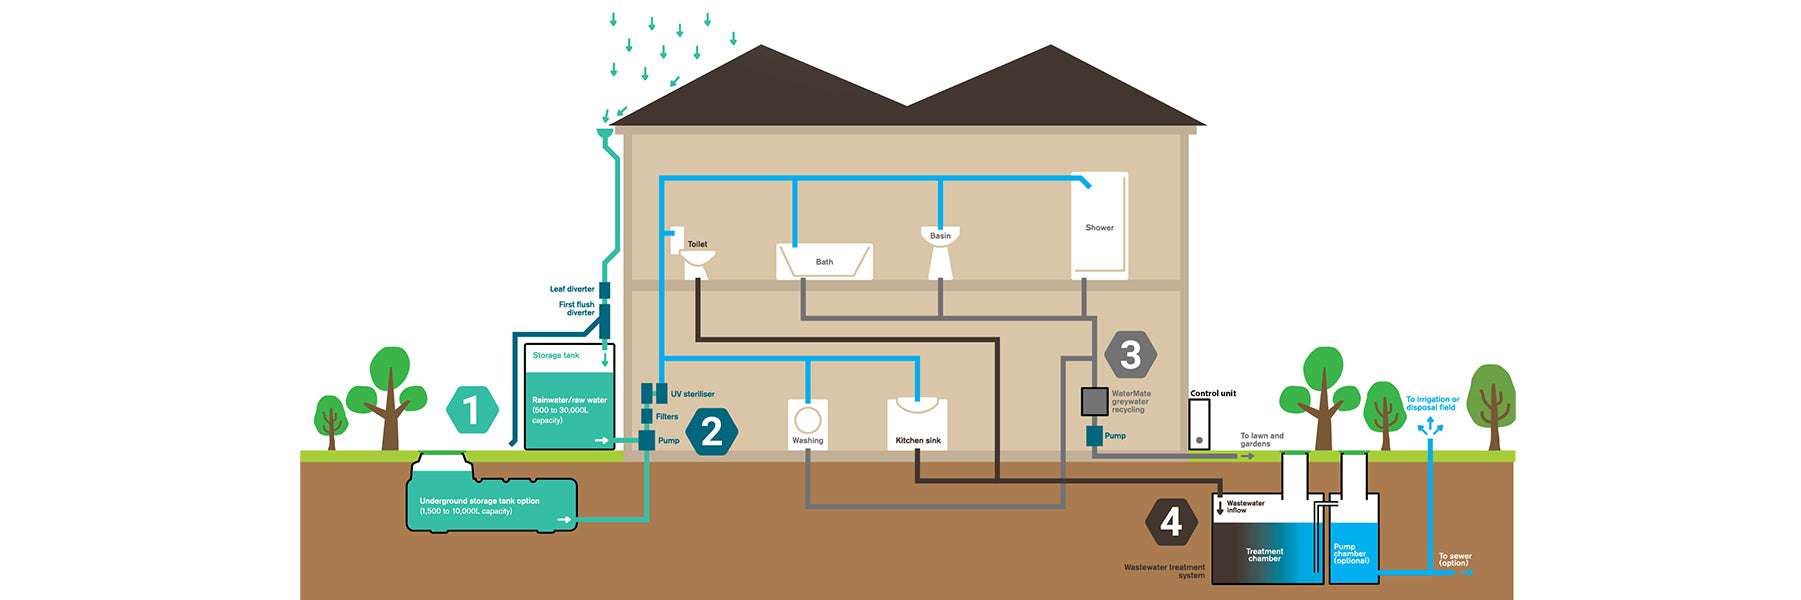 Diagram of plumbing inside and outside house